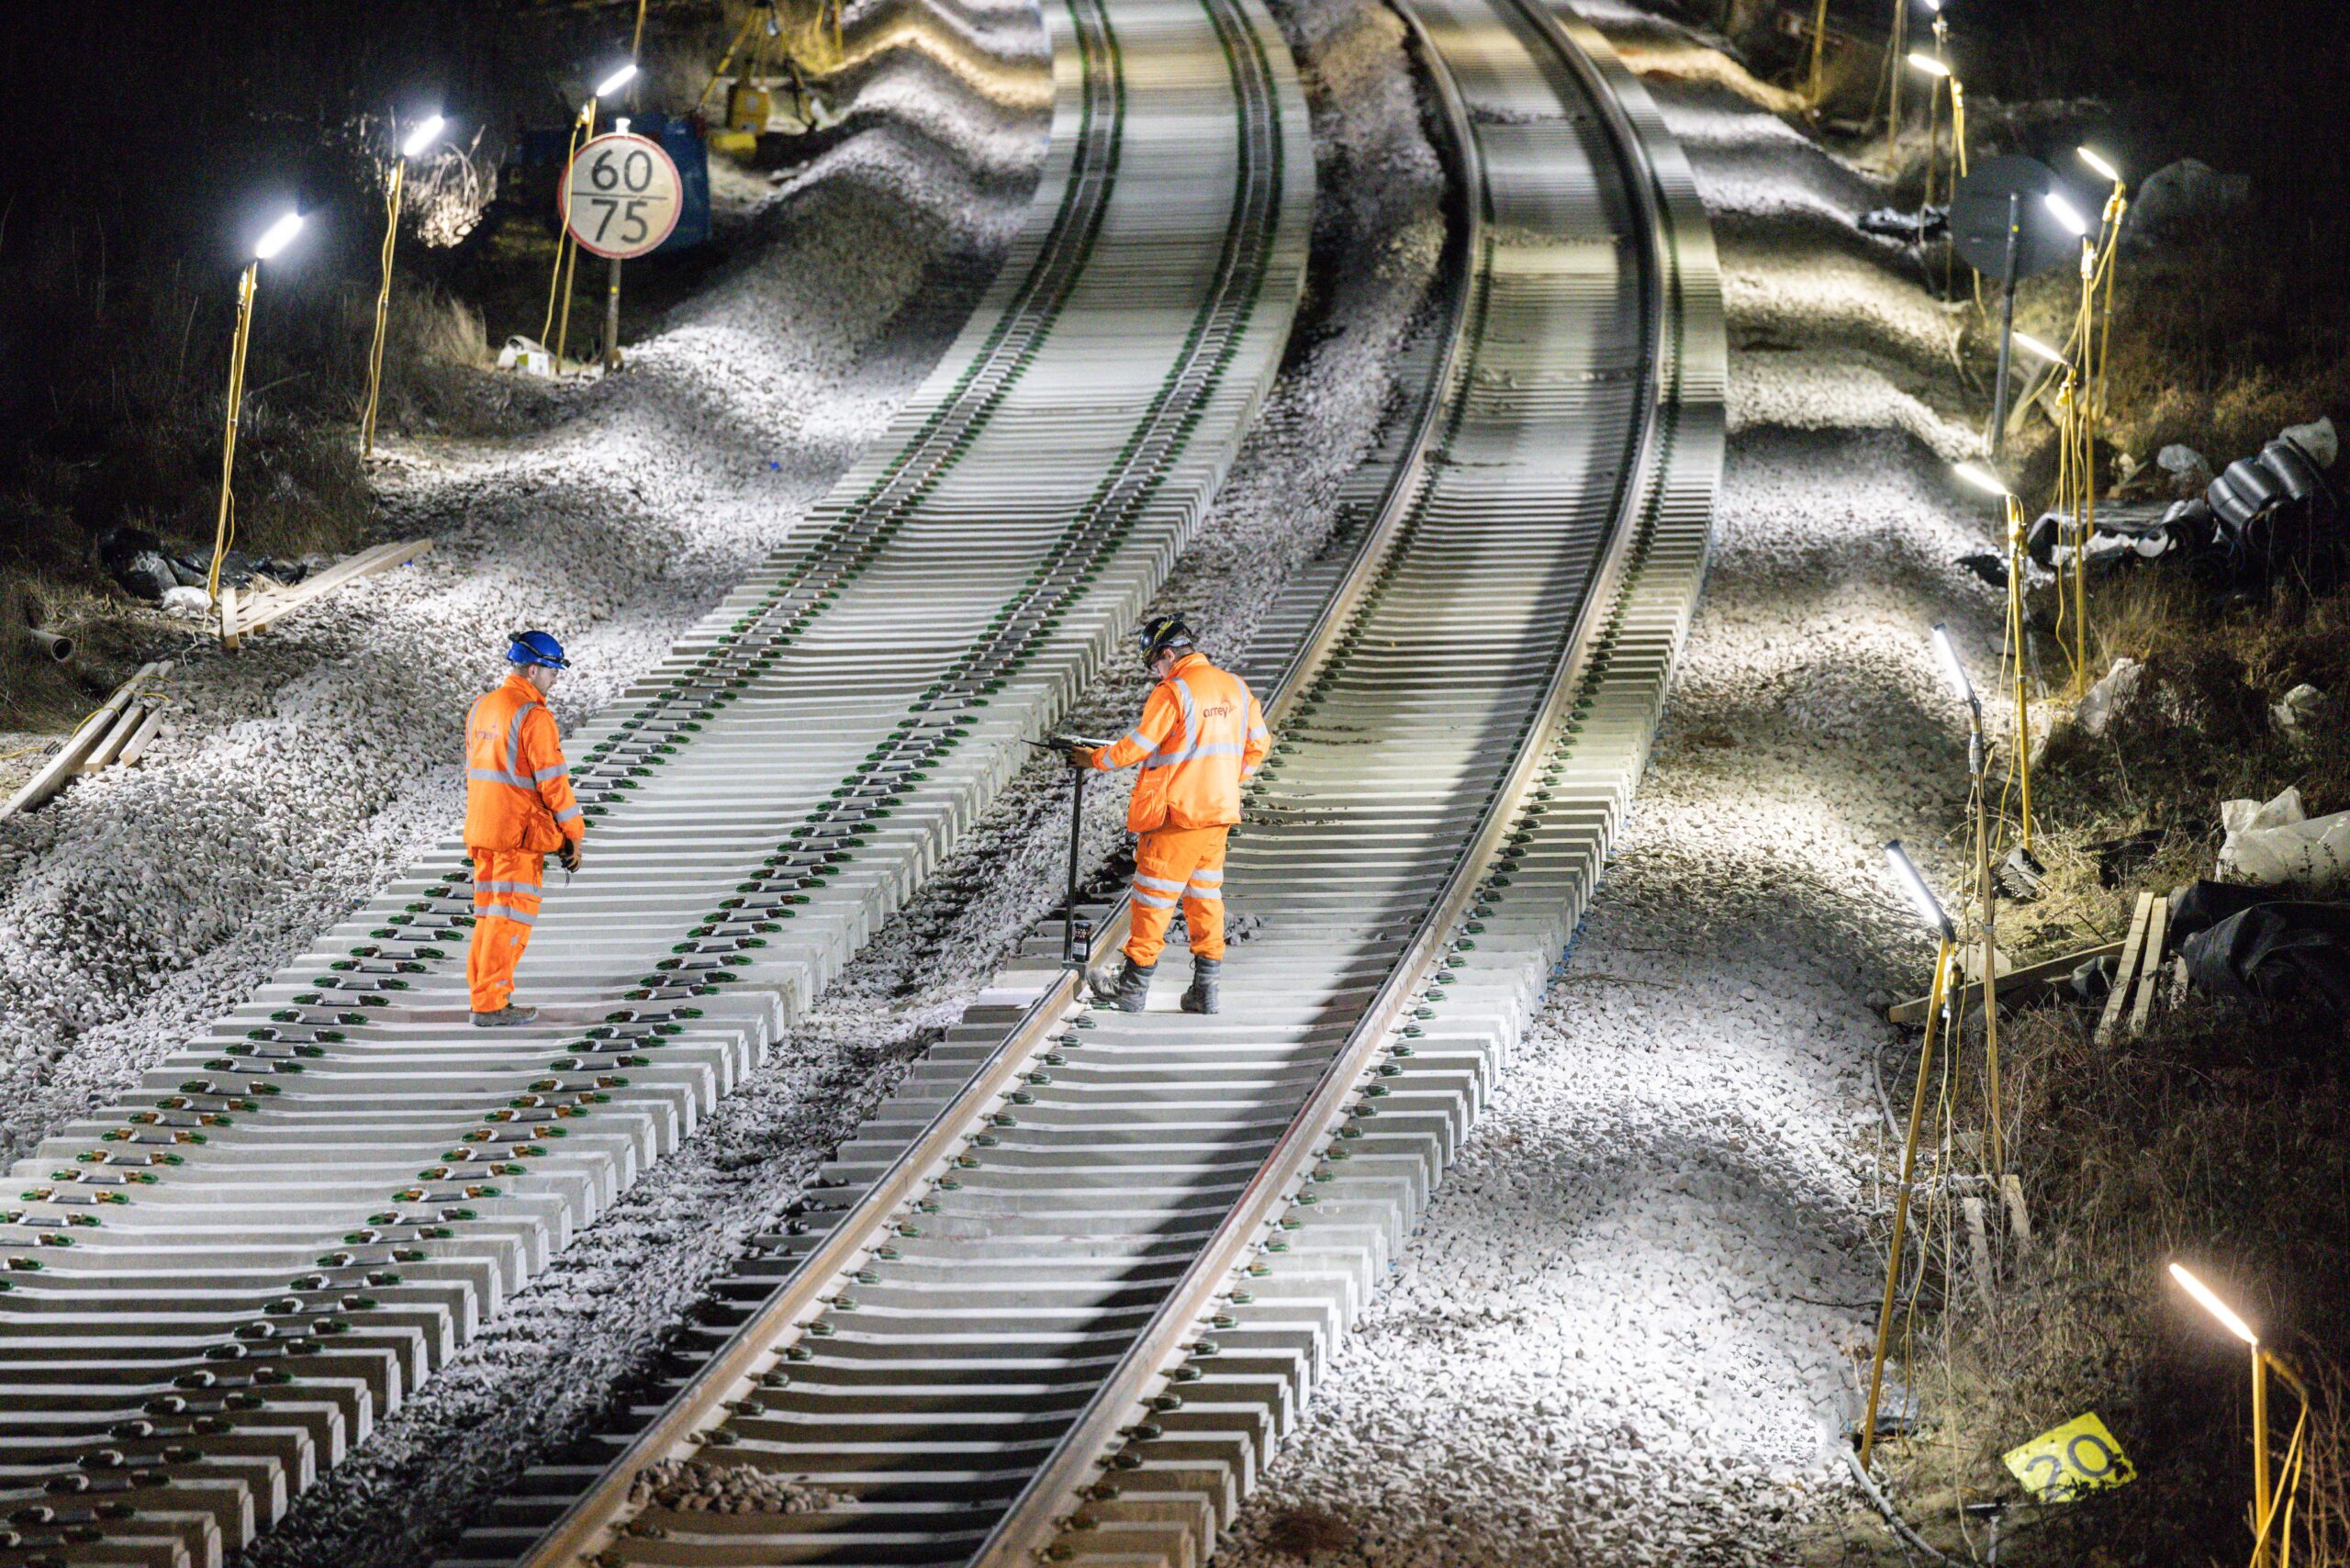 Essential work will take place on the Transpennine Route Upgrade over the next two months